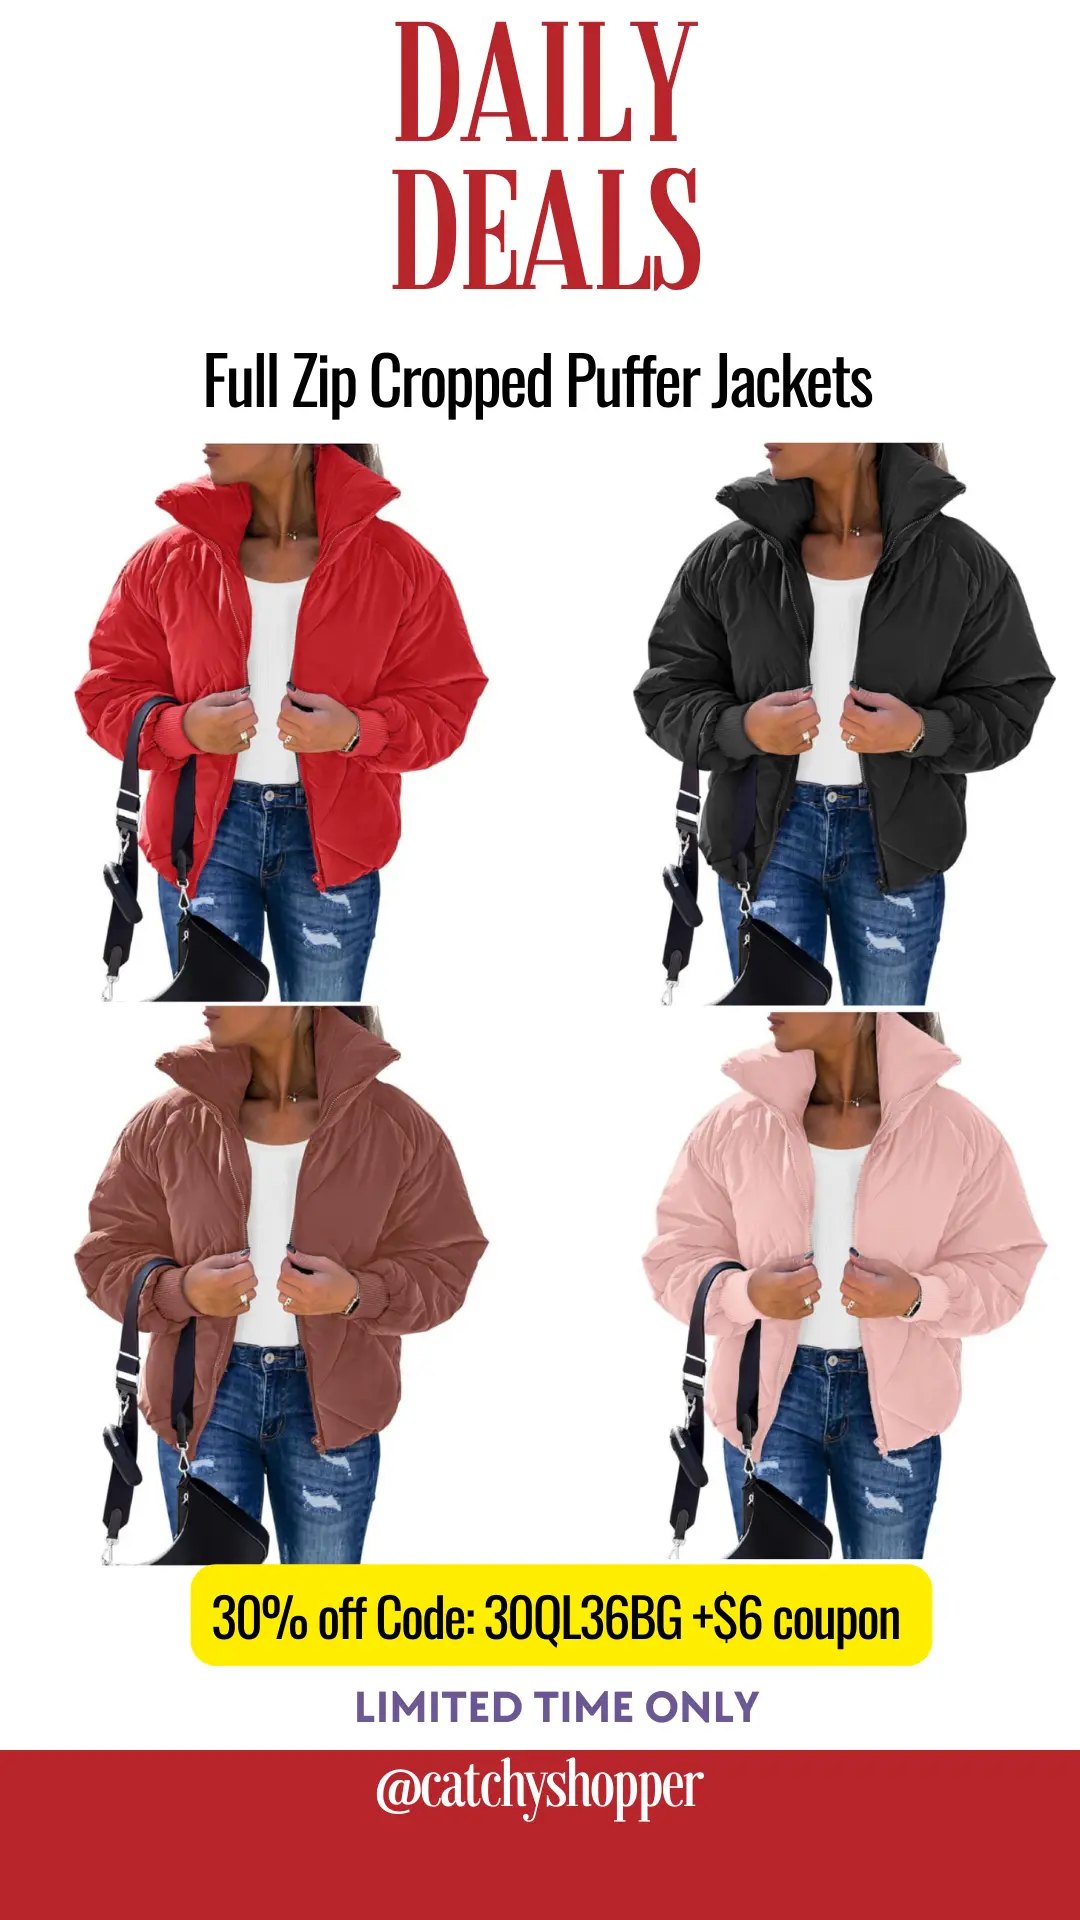 Full Zip Cropped Puffer Jackets